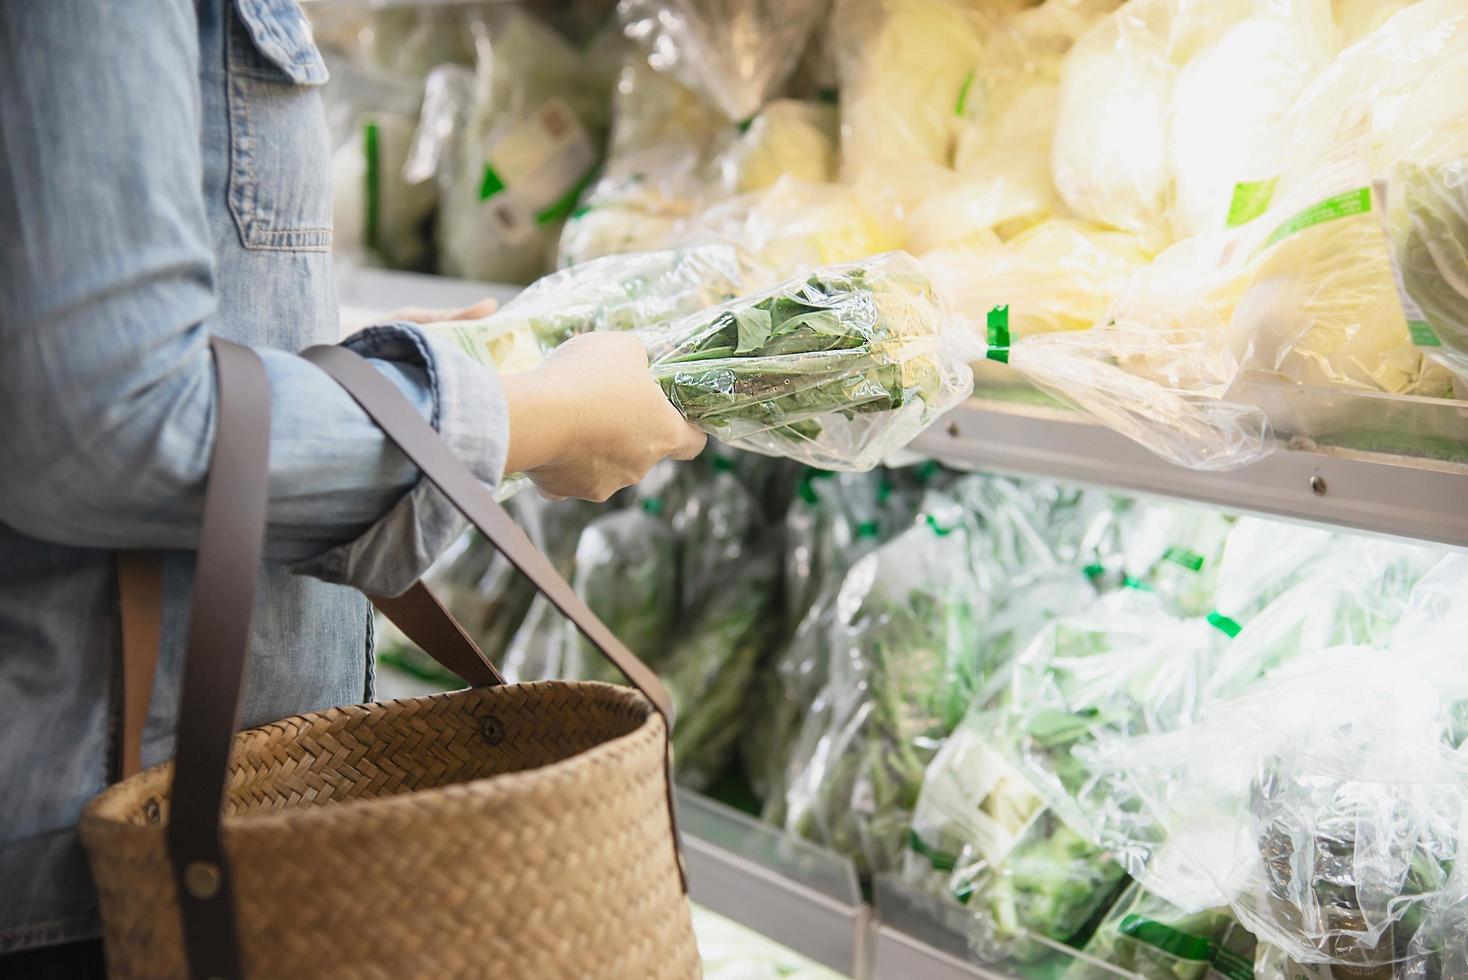 Lady is shopping fresh vegetable in supermarket store - woman in fresh market lifestyle concept photo